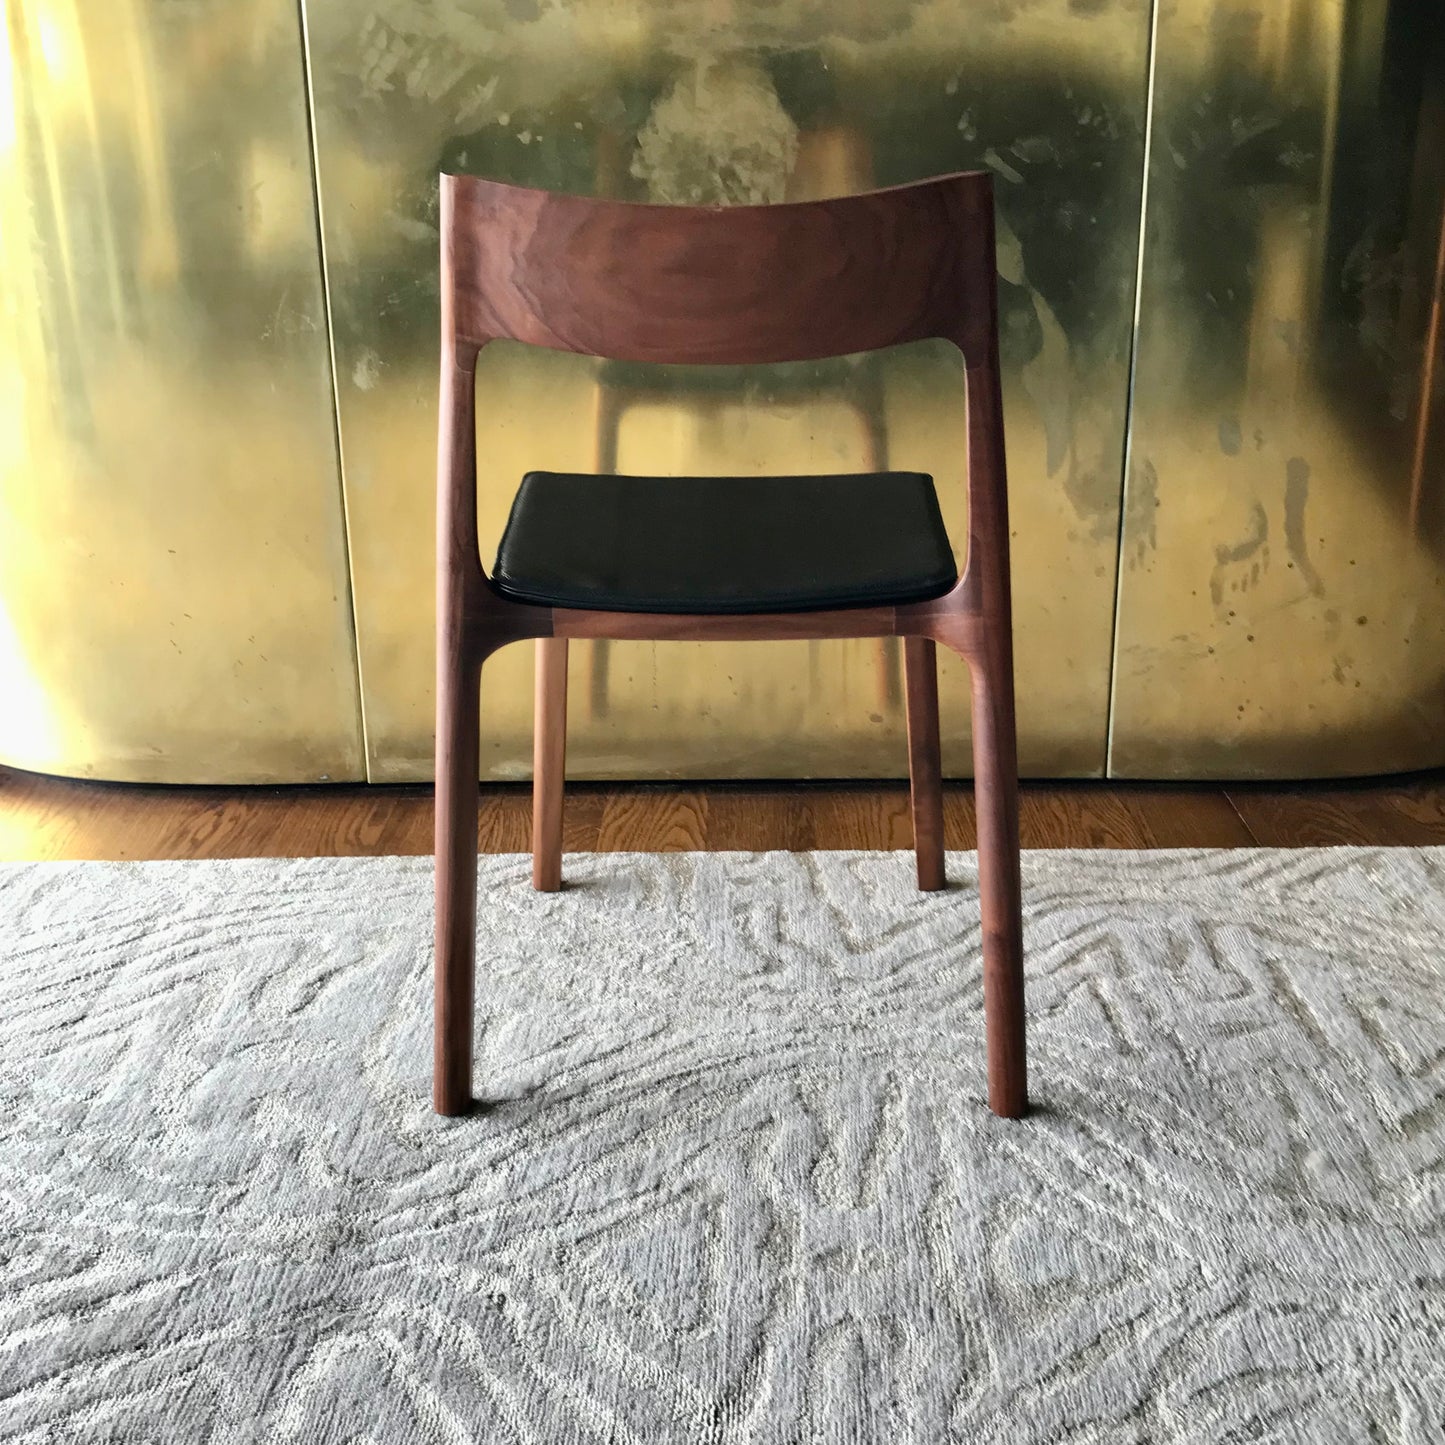 Set of SIX Molloy Dining Chair by Adam Goodrum for NAU